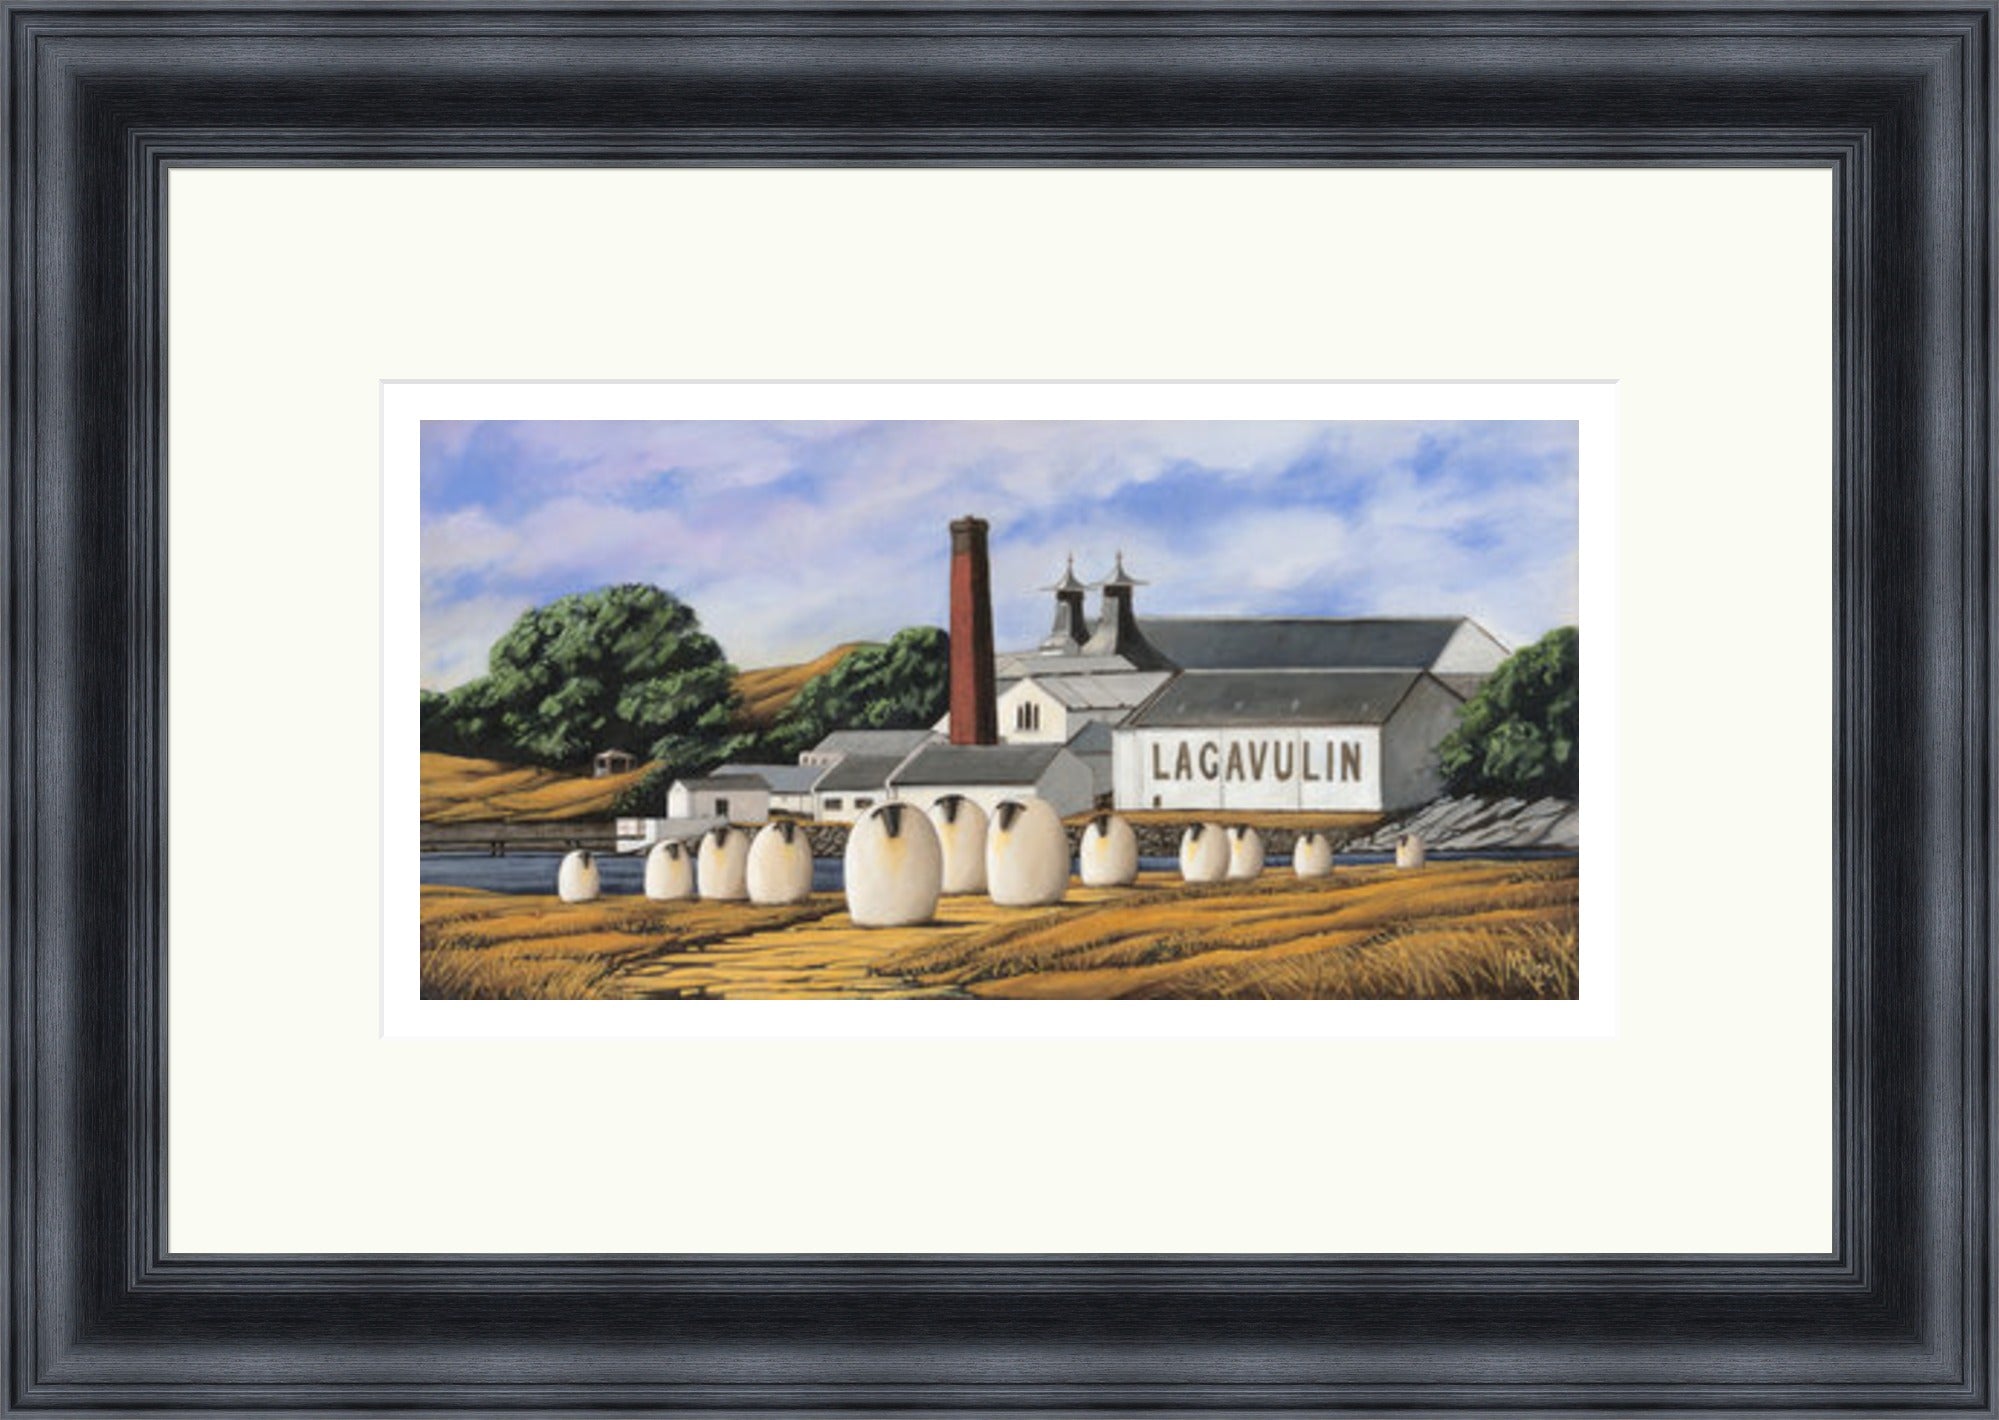 On the Whisky Trail - Lagavulin by Stan Milne – Art Prints Gallery